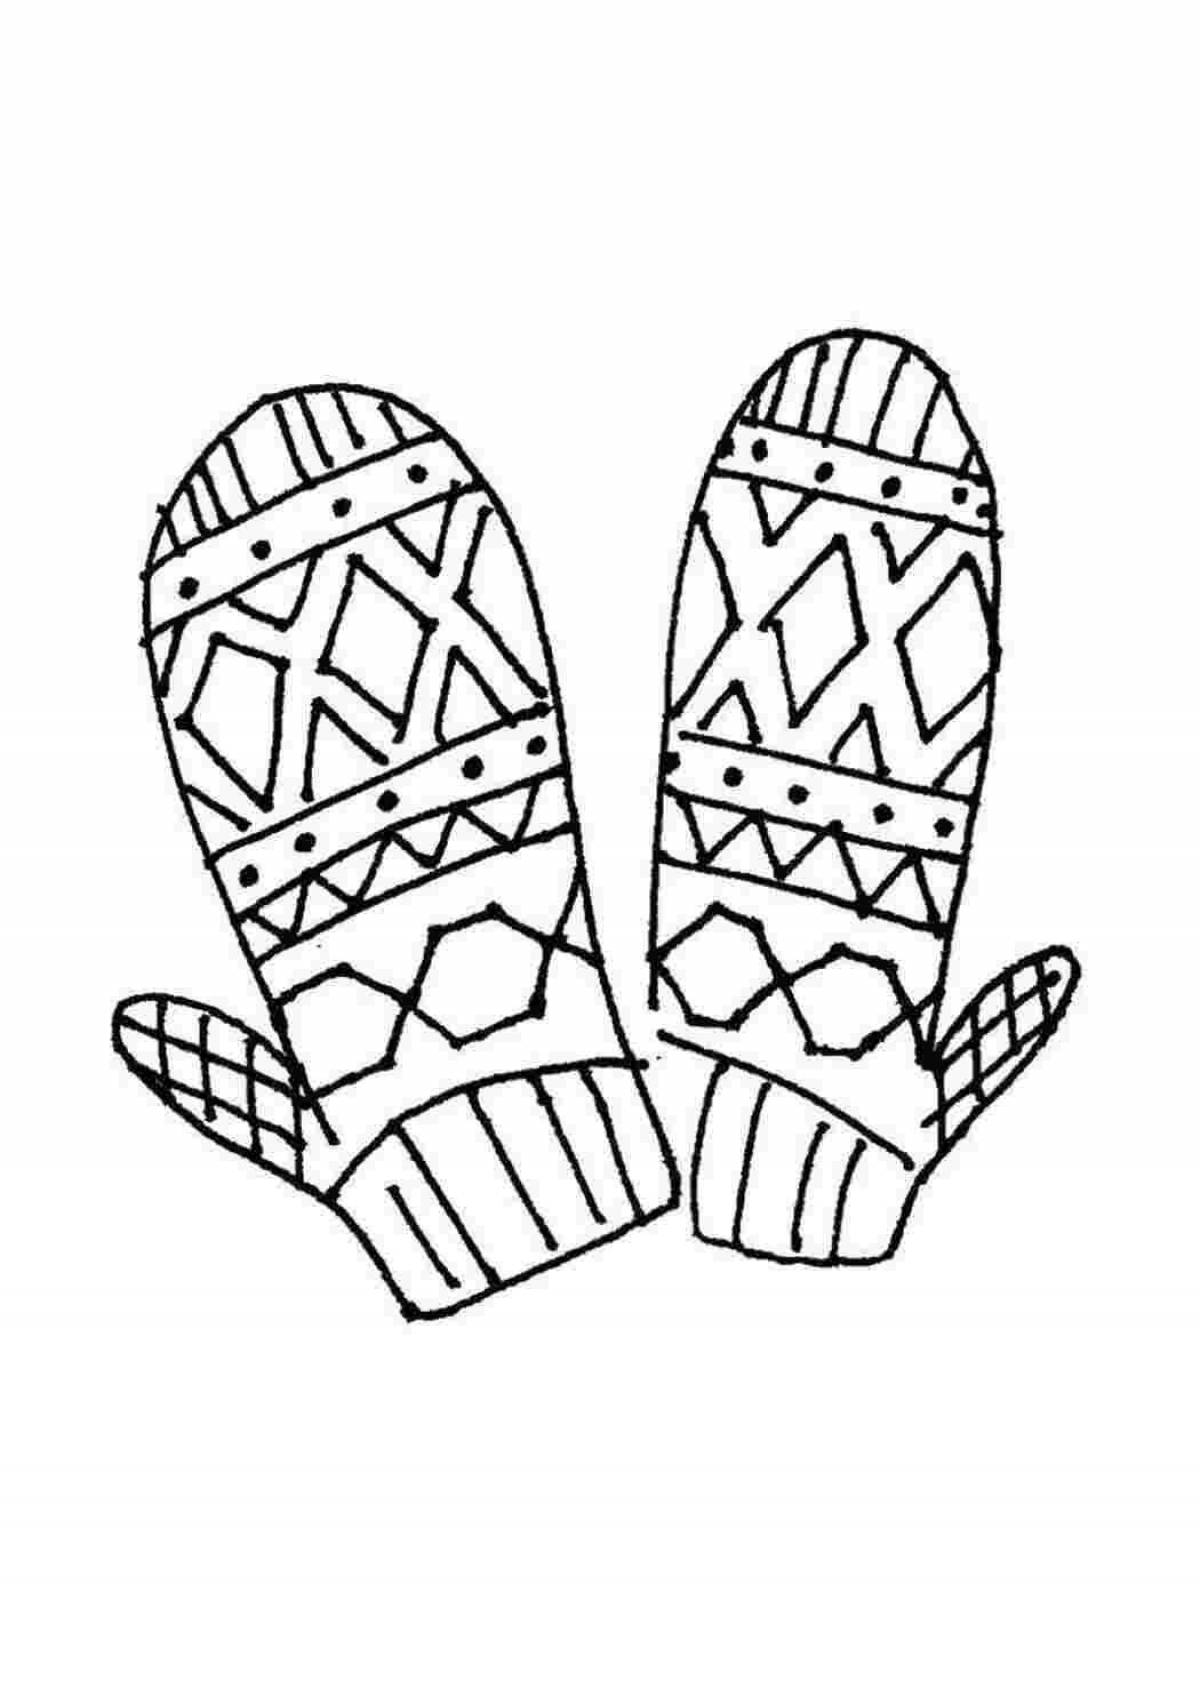 Coloring page charming patterned mitten